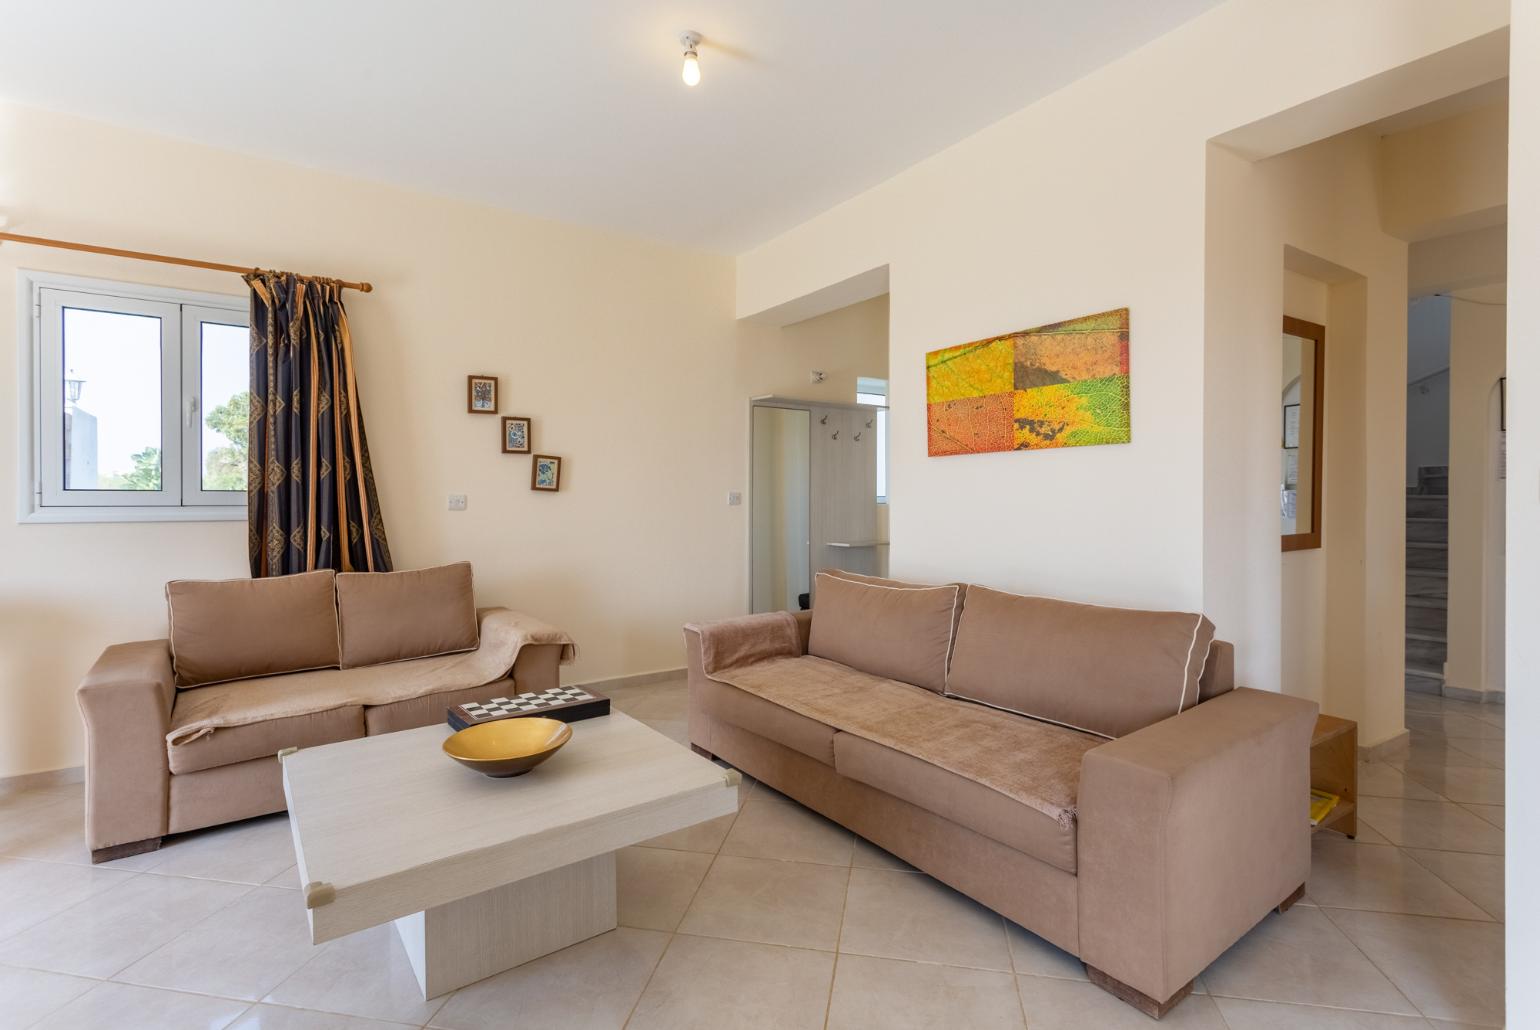 Open-plan living room with sofas, dining area, kitchen, ornamental fireplace, A/C, WiFi internet, satellite TV, pool table, foosball table, and terrace access with sea views